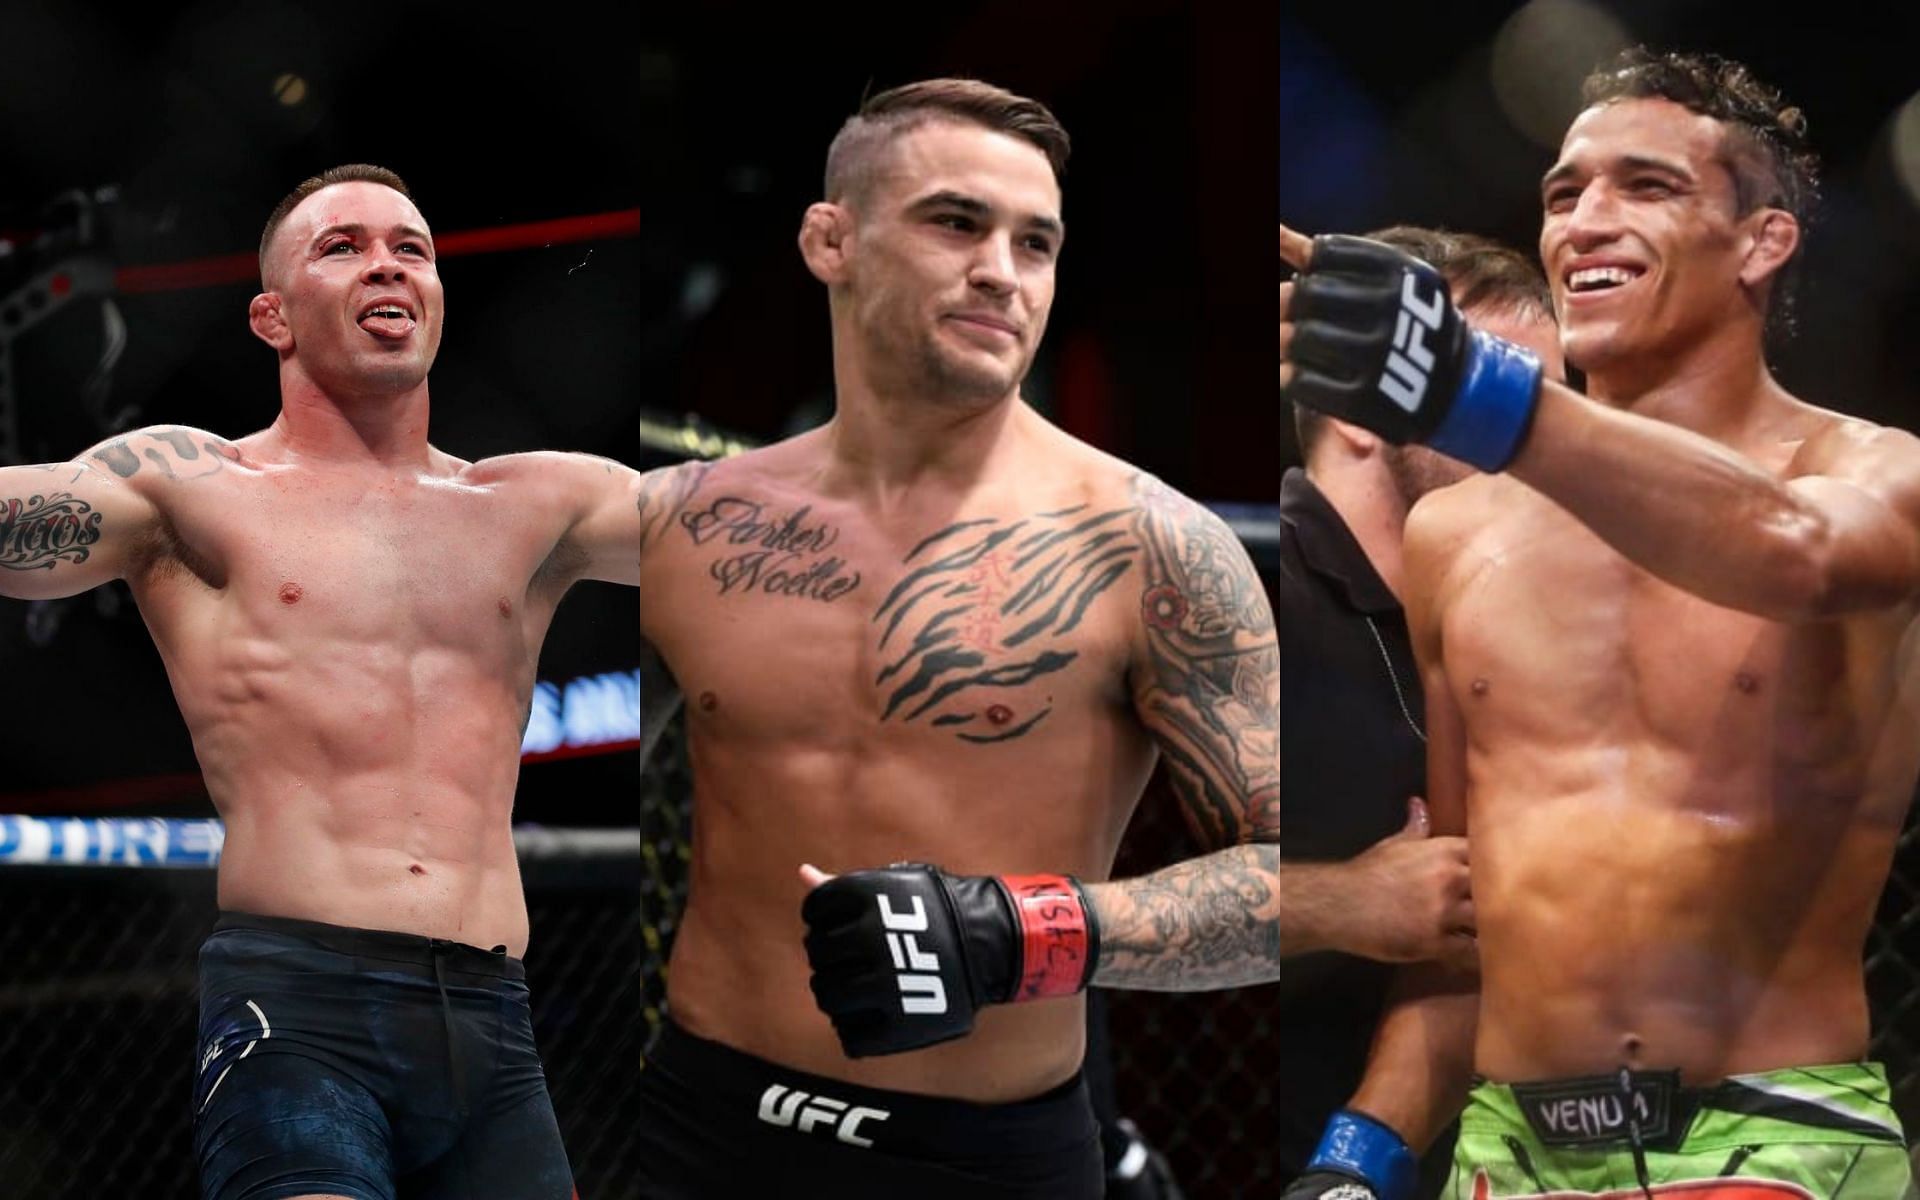 Colby Covington (L), Dustin Poirier (C) and Charles Oliveira (R) PC: UFC